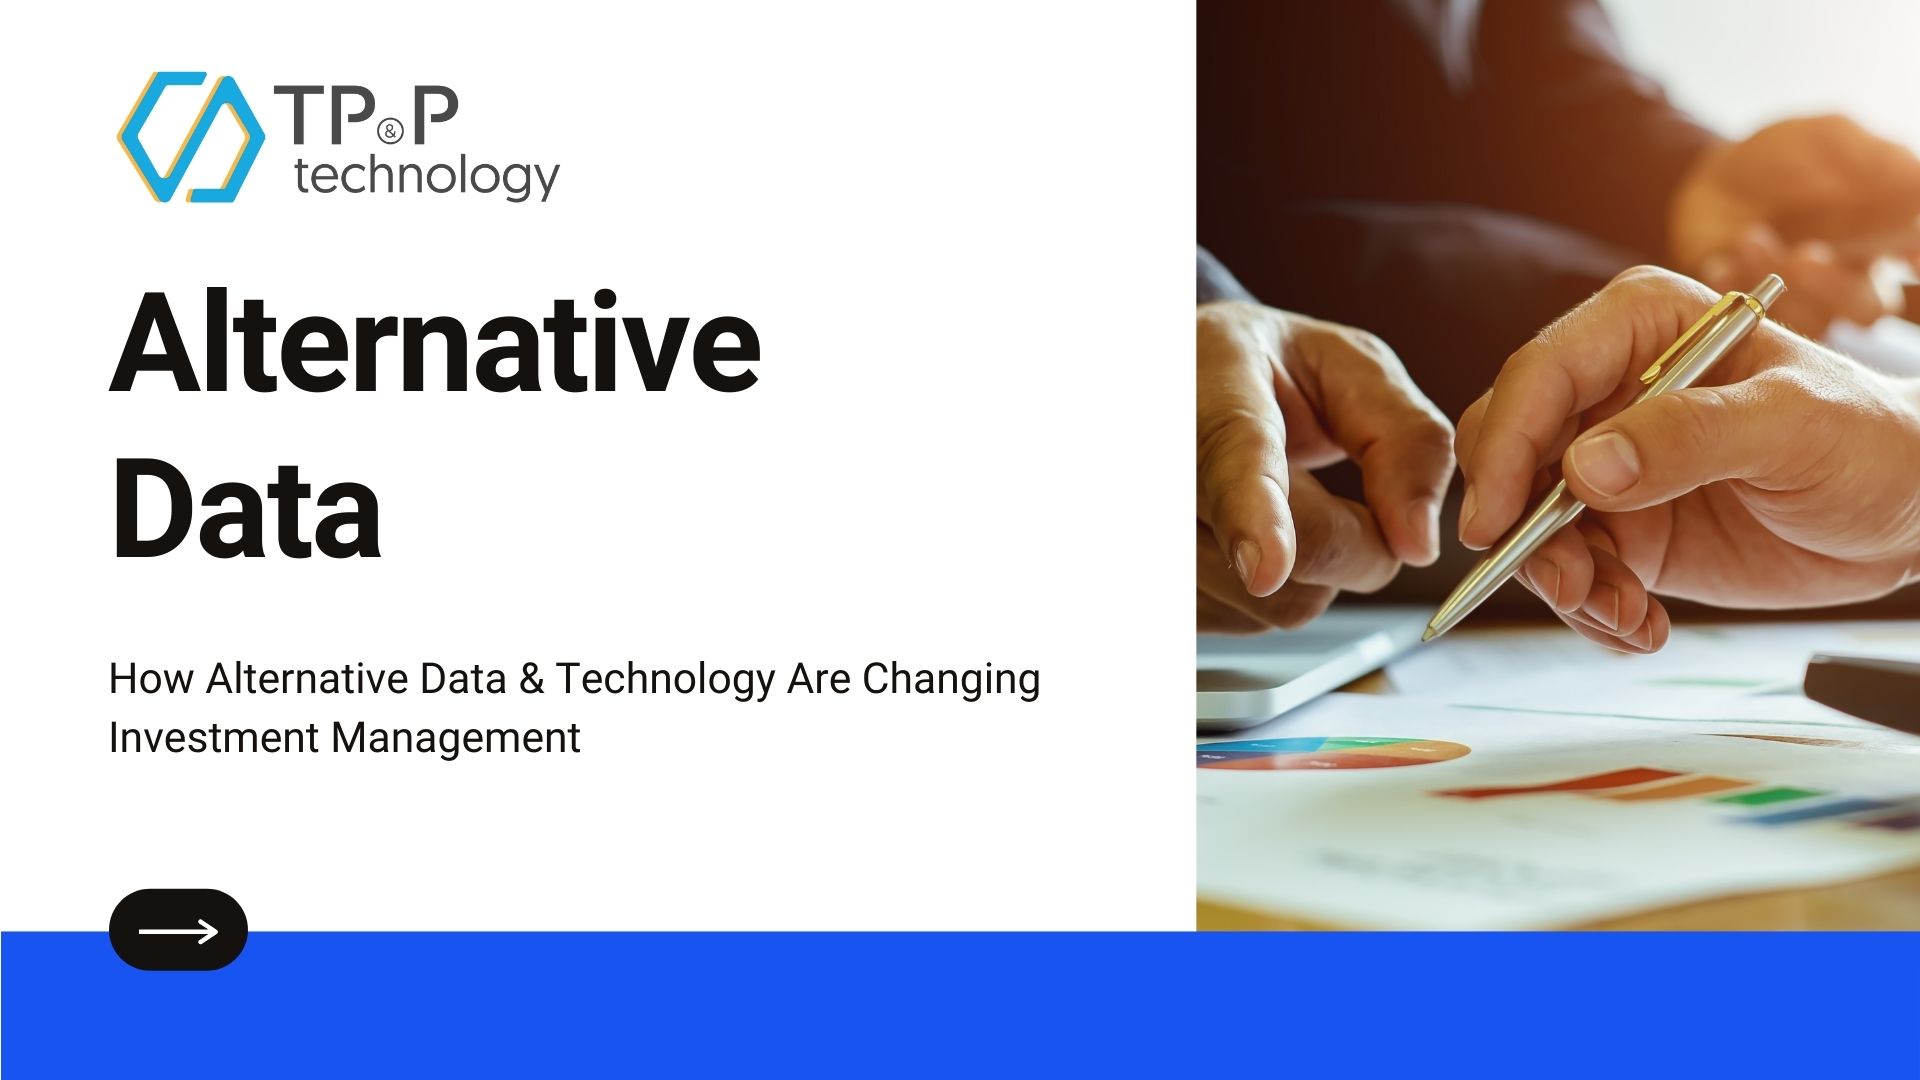 How Alternative Data & Technology Are Changing Investment Management